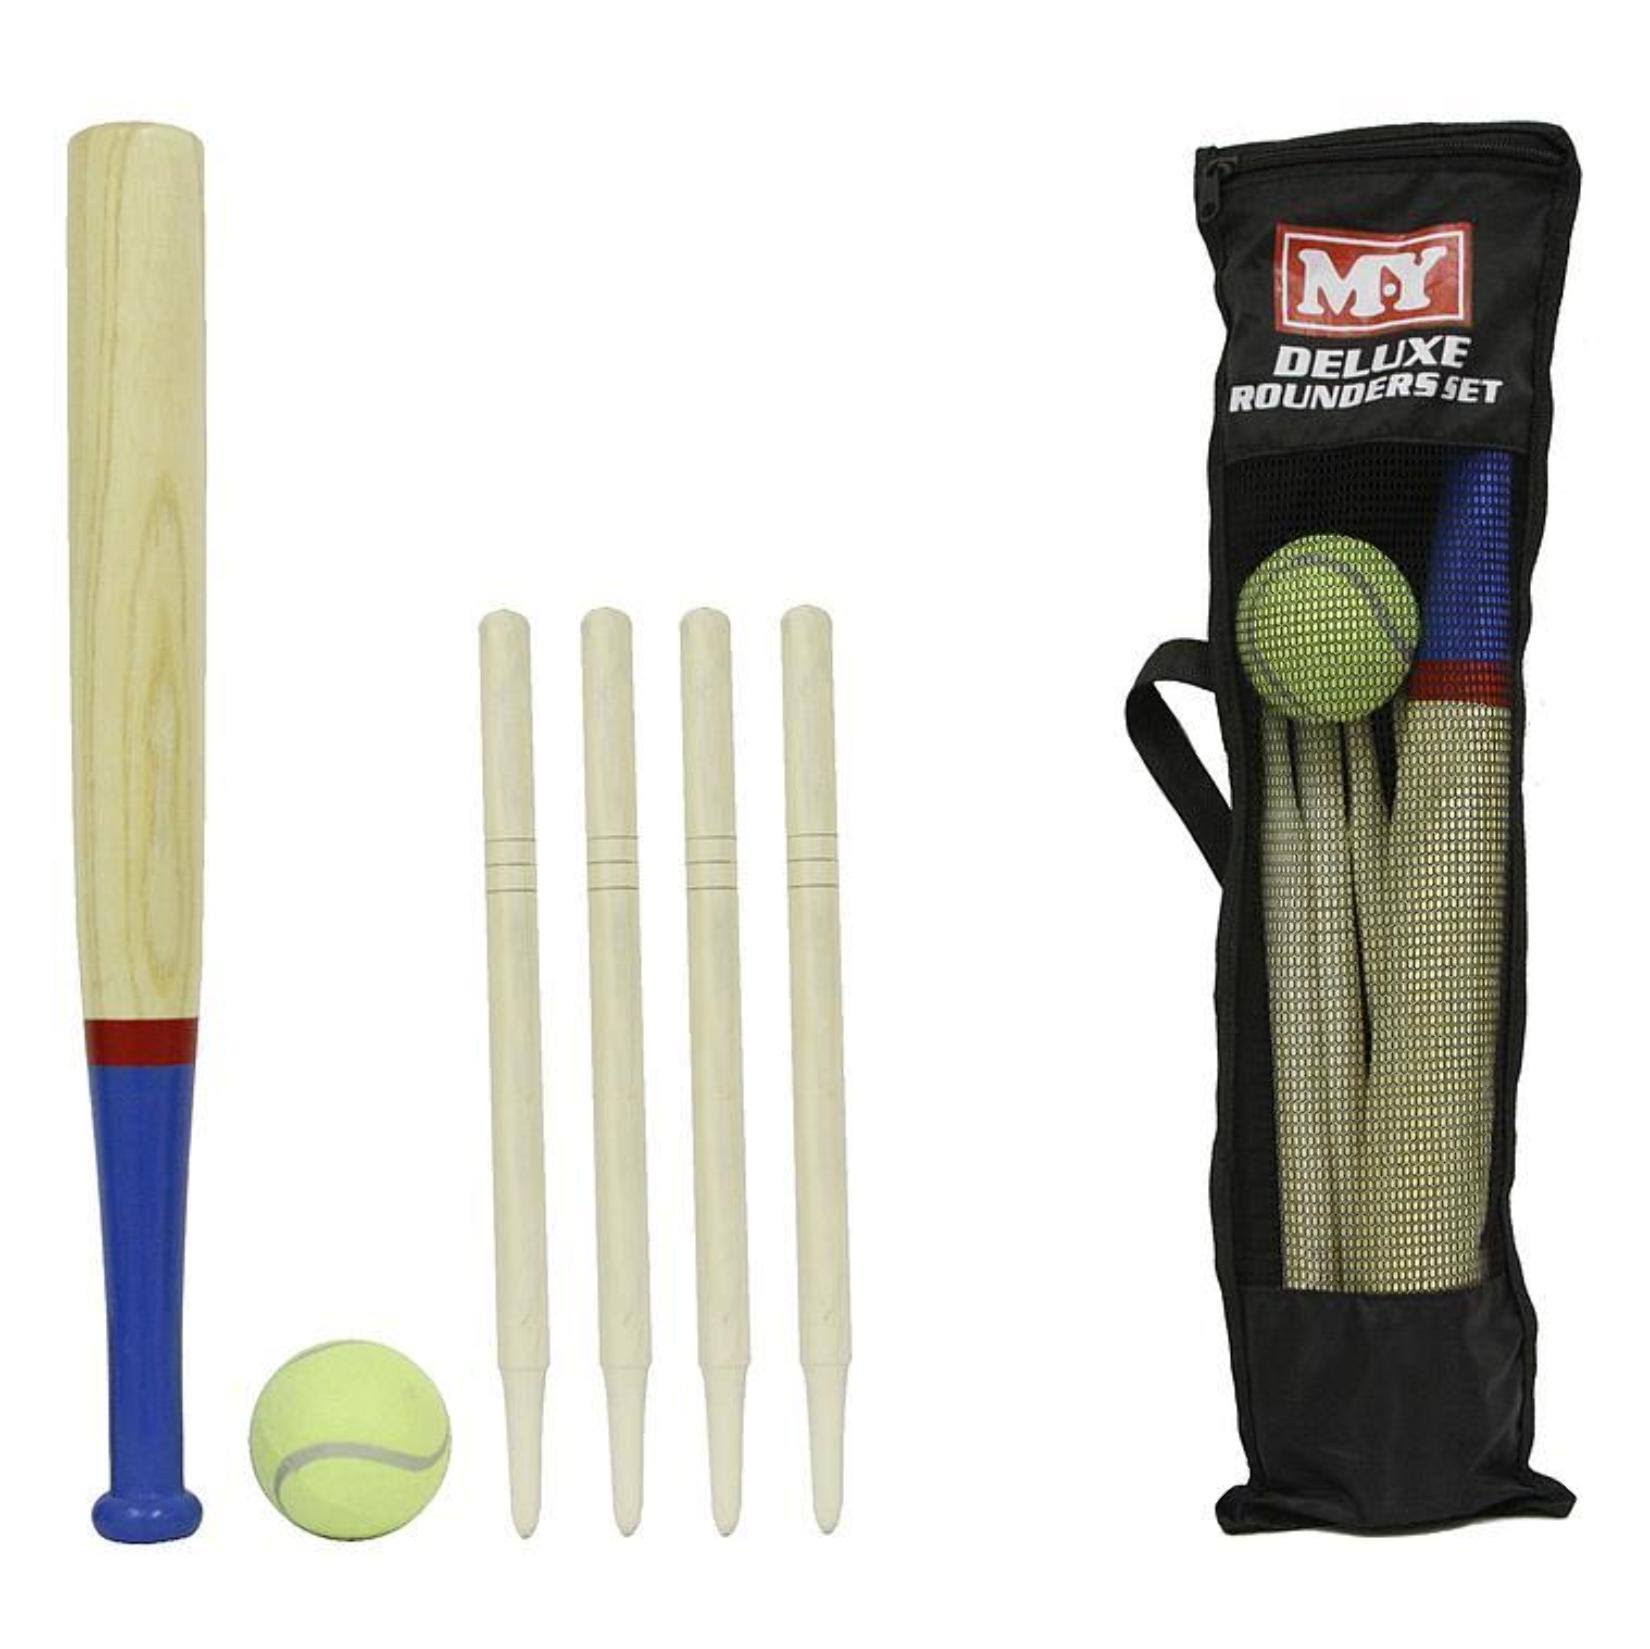 M. y Deluxe 6 Piece Wooden Rounders Set & Carry Bag